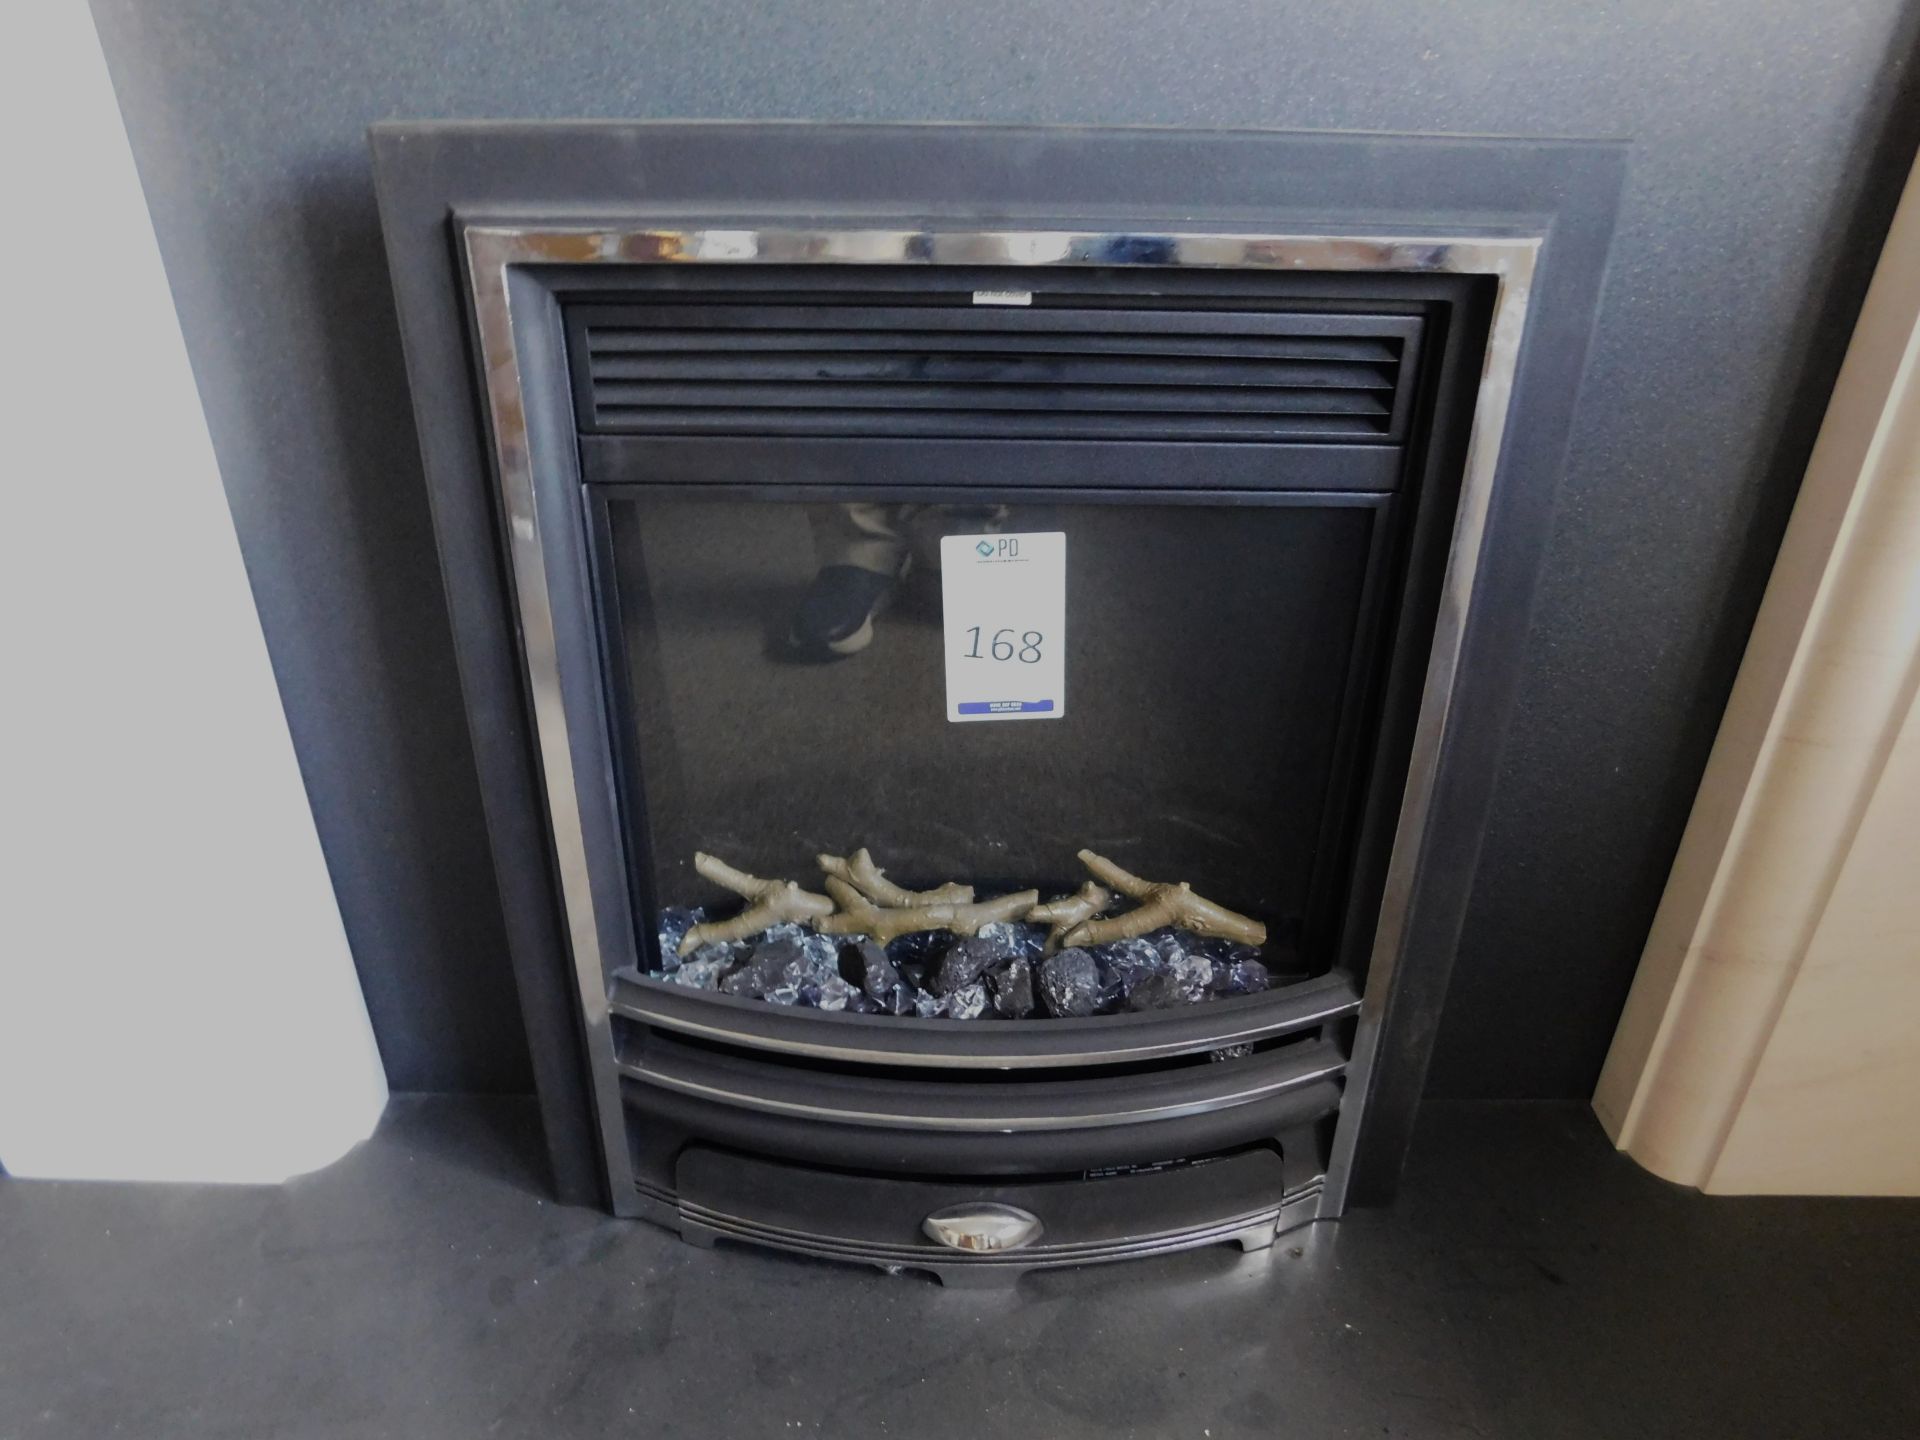 Ex-Display Unbadged Electric Coal Effect Fire with Celsi Remote (Where the company’s description/